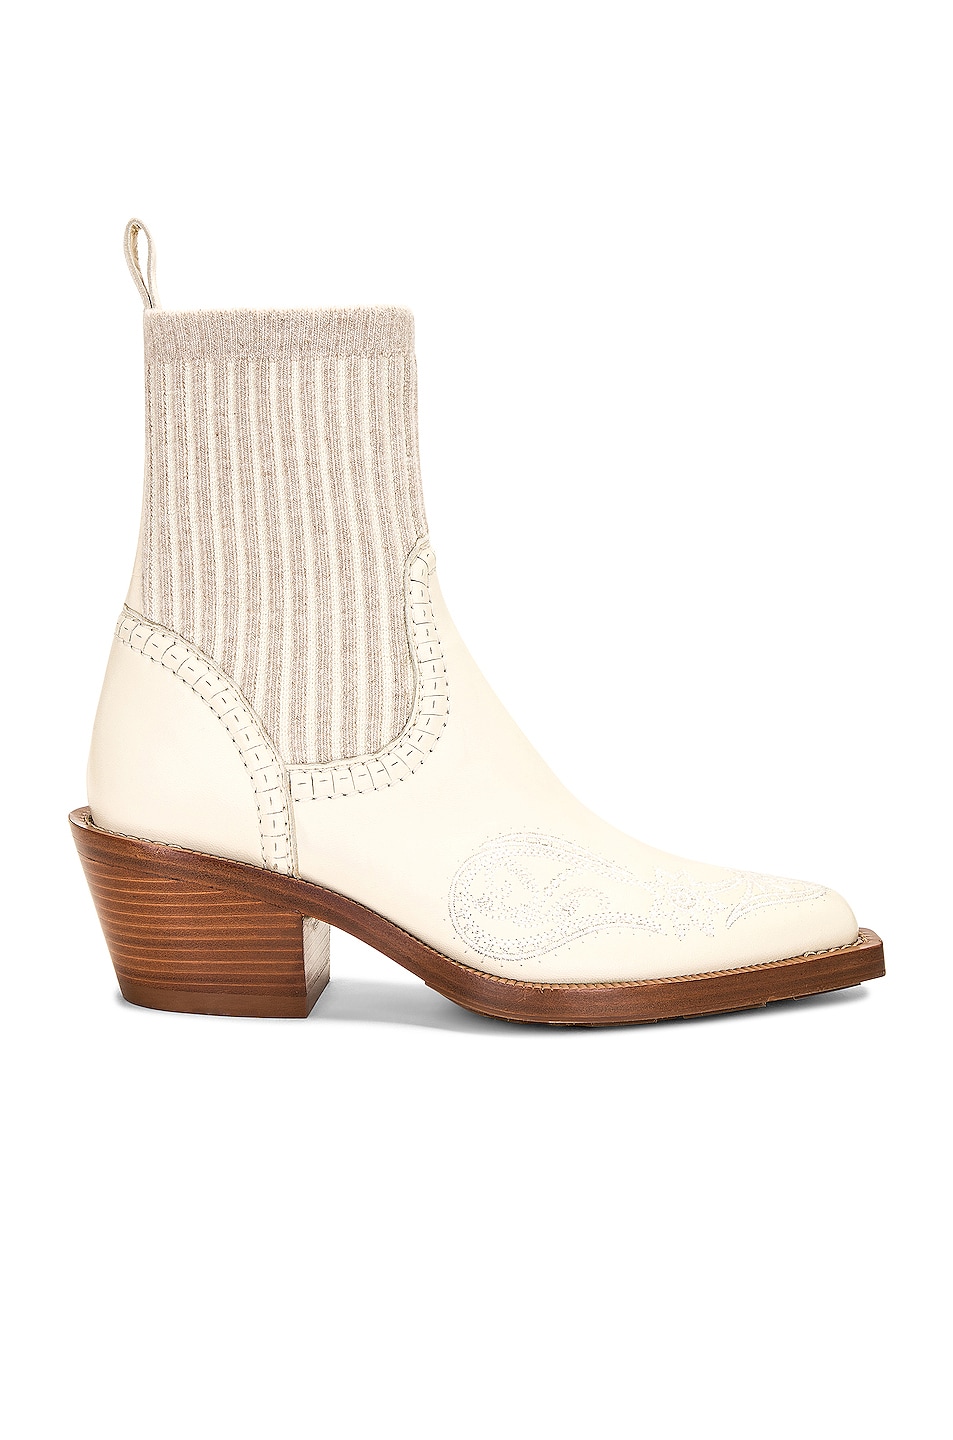 Image 1 of Chloe Nellie Ankle Boot in Eggshell